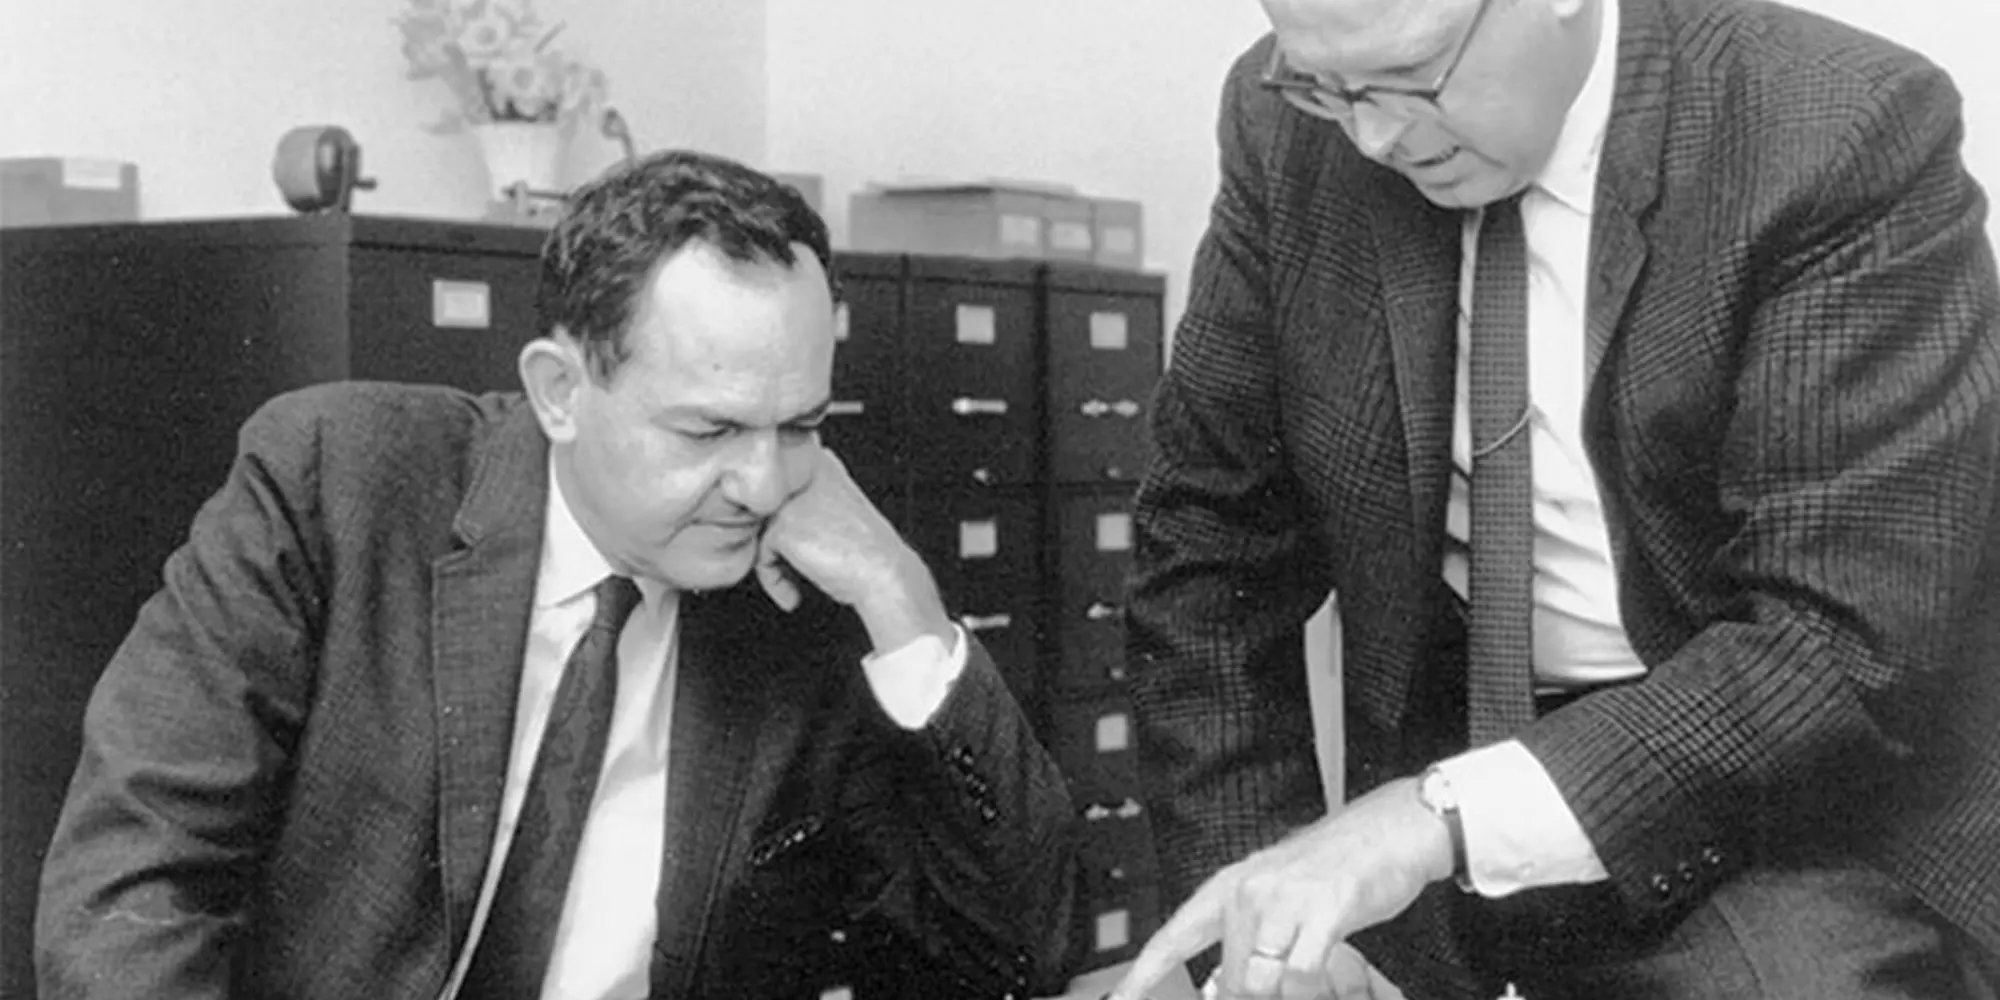 Carnegie Mellon University researchers Allen Newell and Herbert Simon (the founding father of AI) playing chess together as they develop AI and chess software in the 1950s.